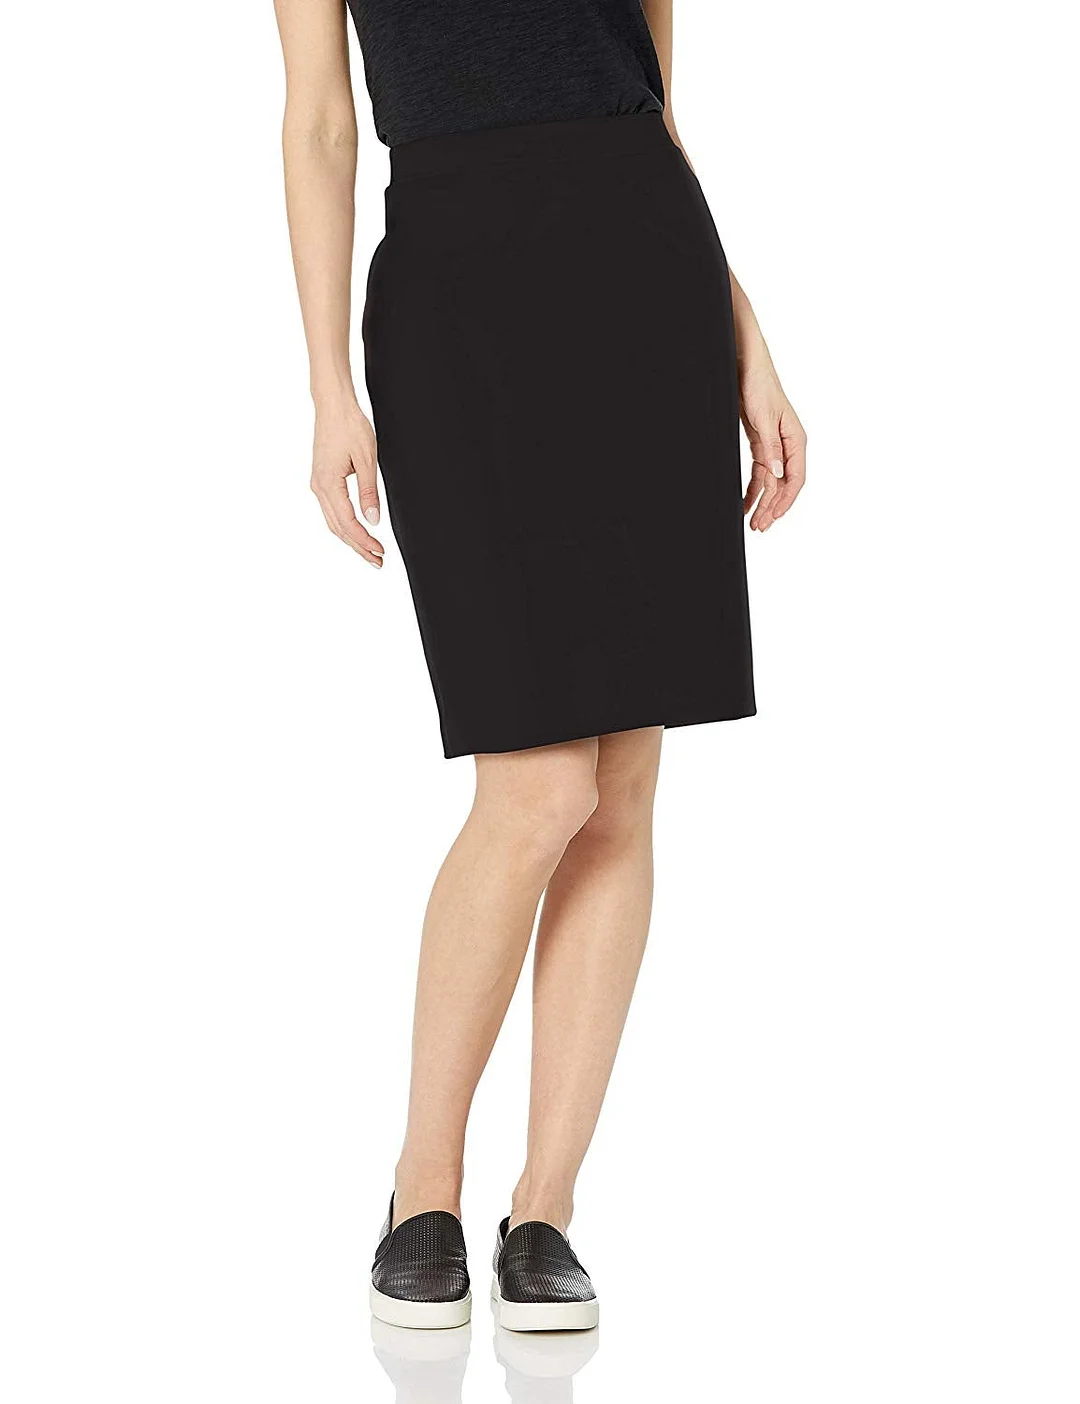 Women's Terry Cotton and Modal Pencil Skirt